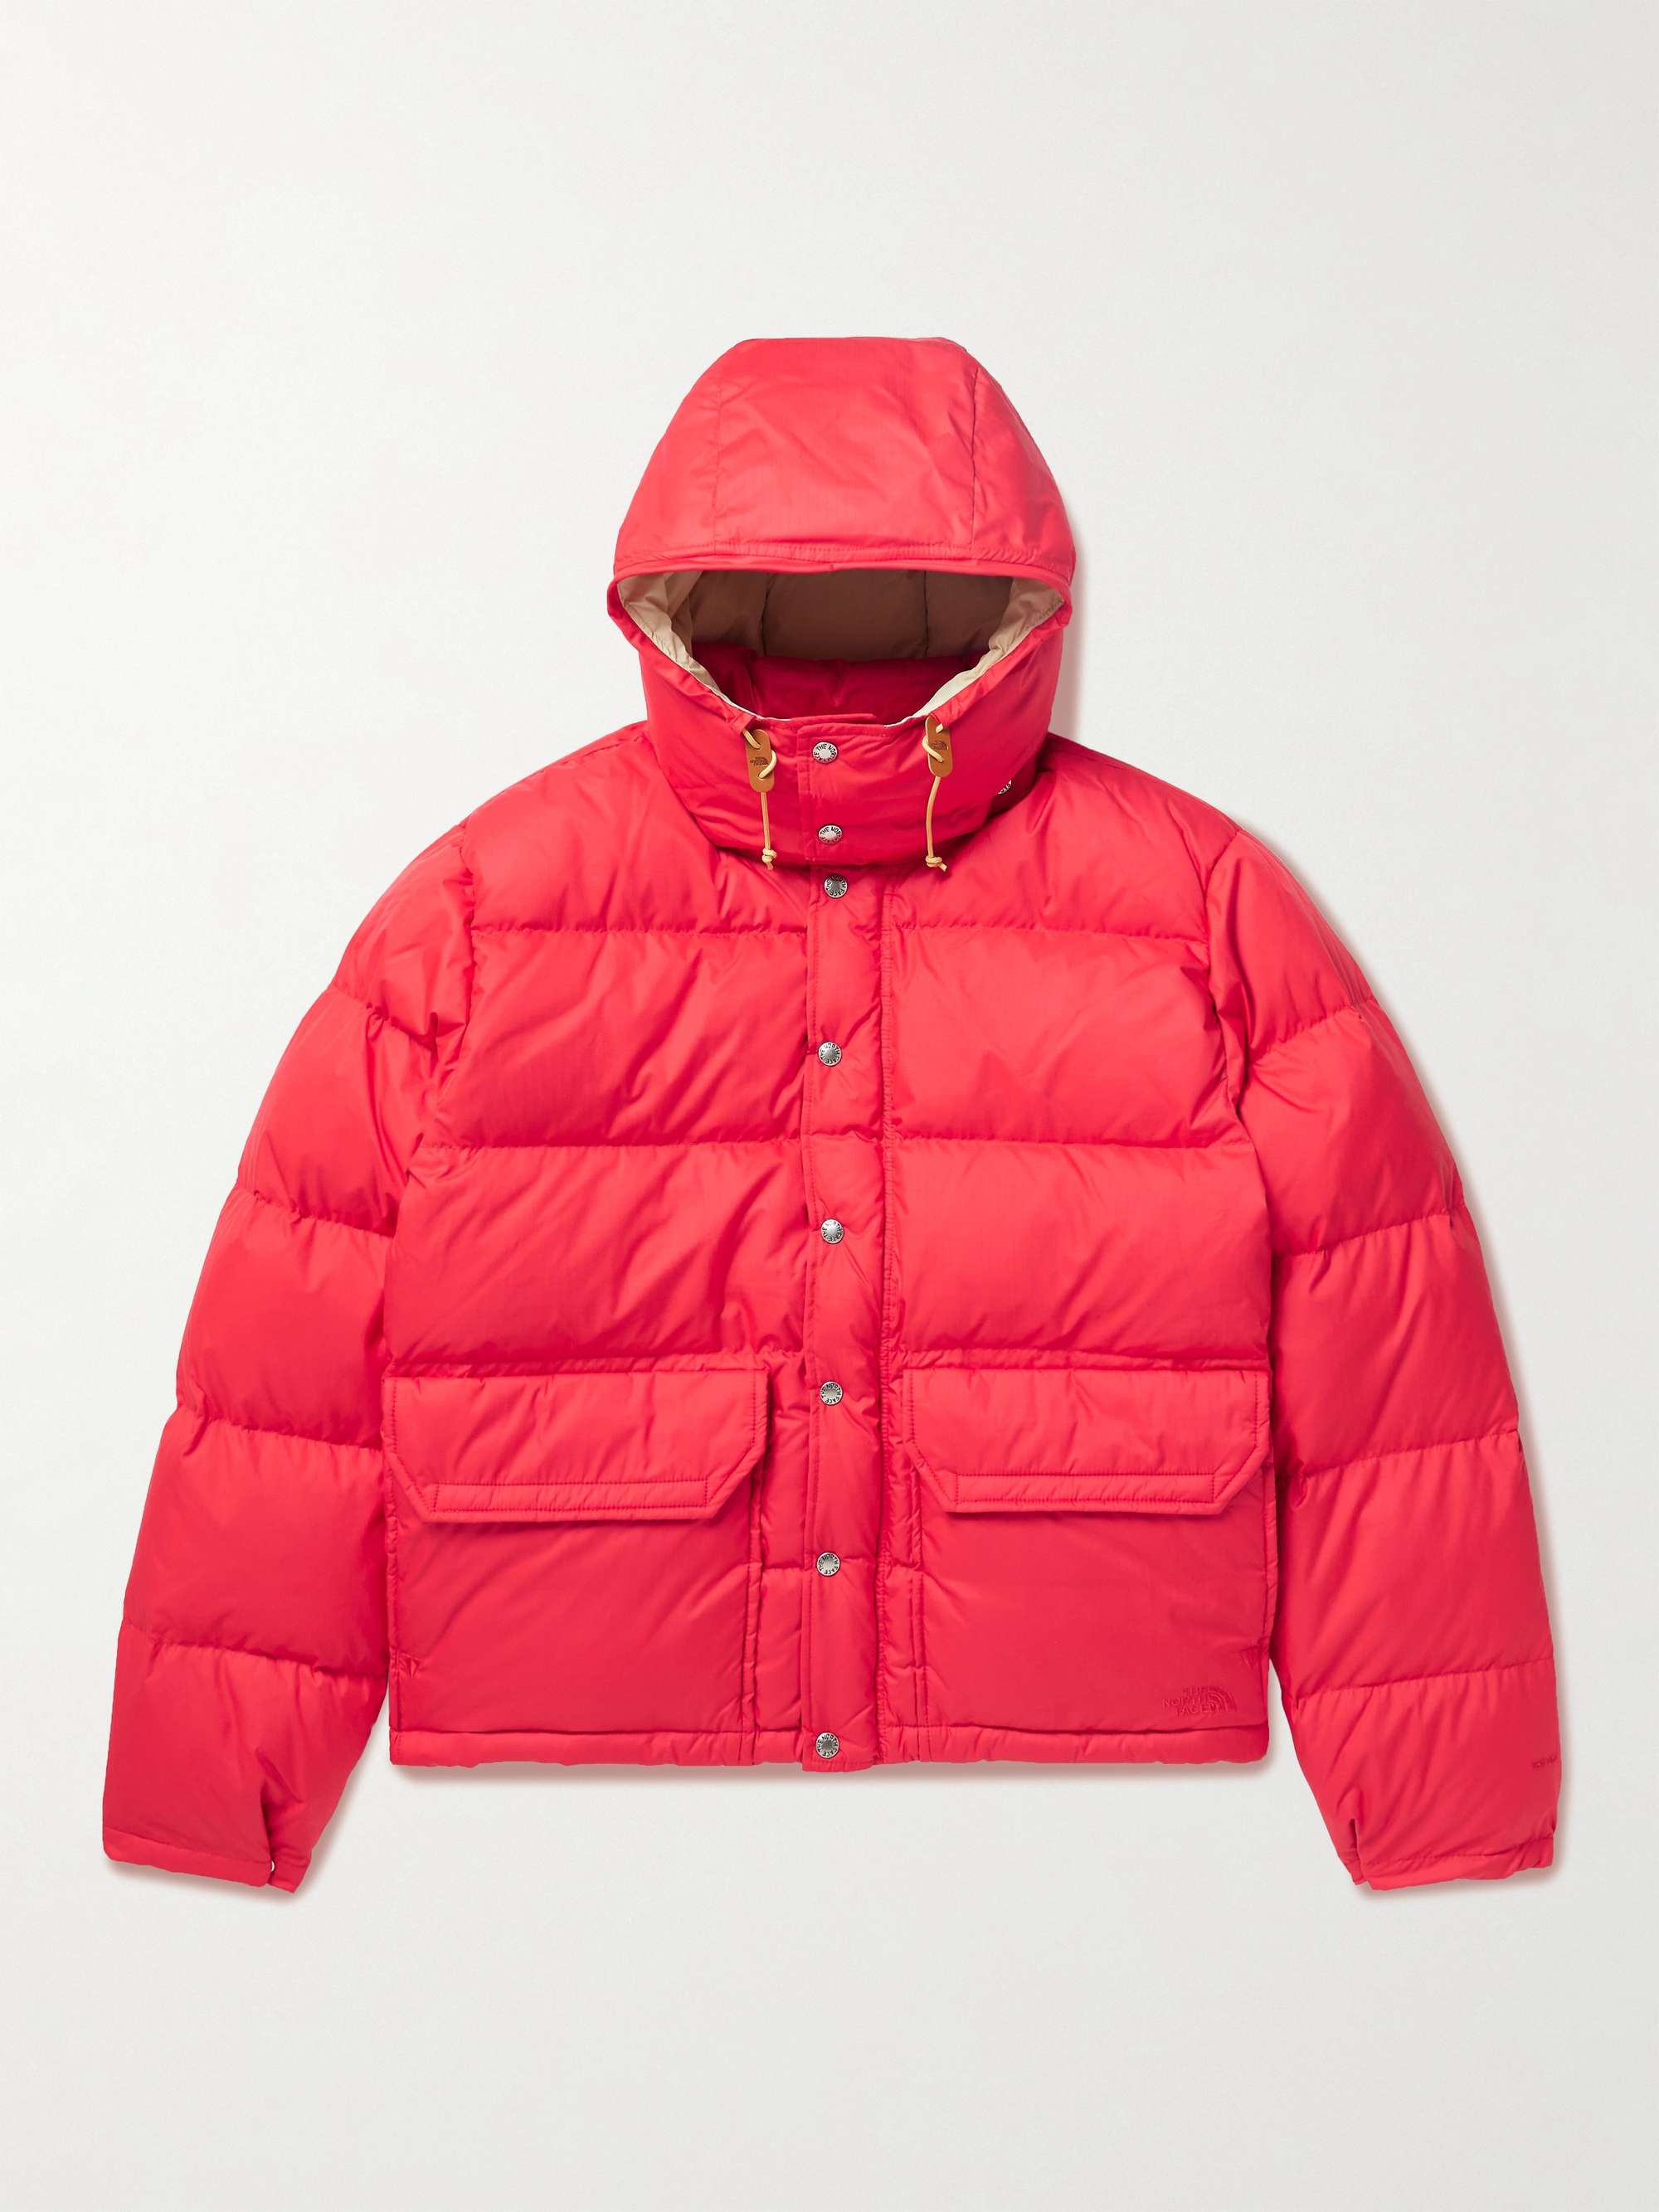 XL The North Face Down Sierra 3.0 Jacket